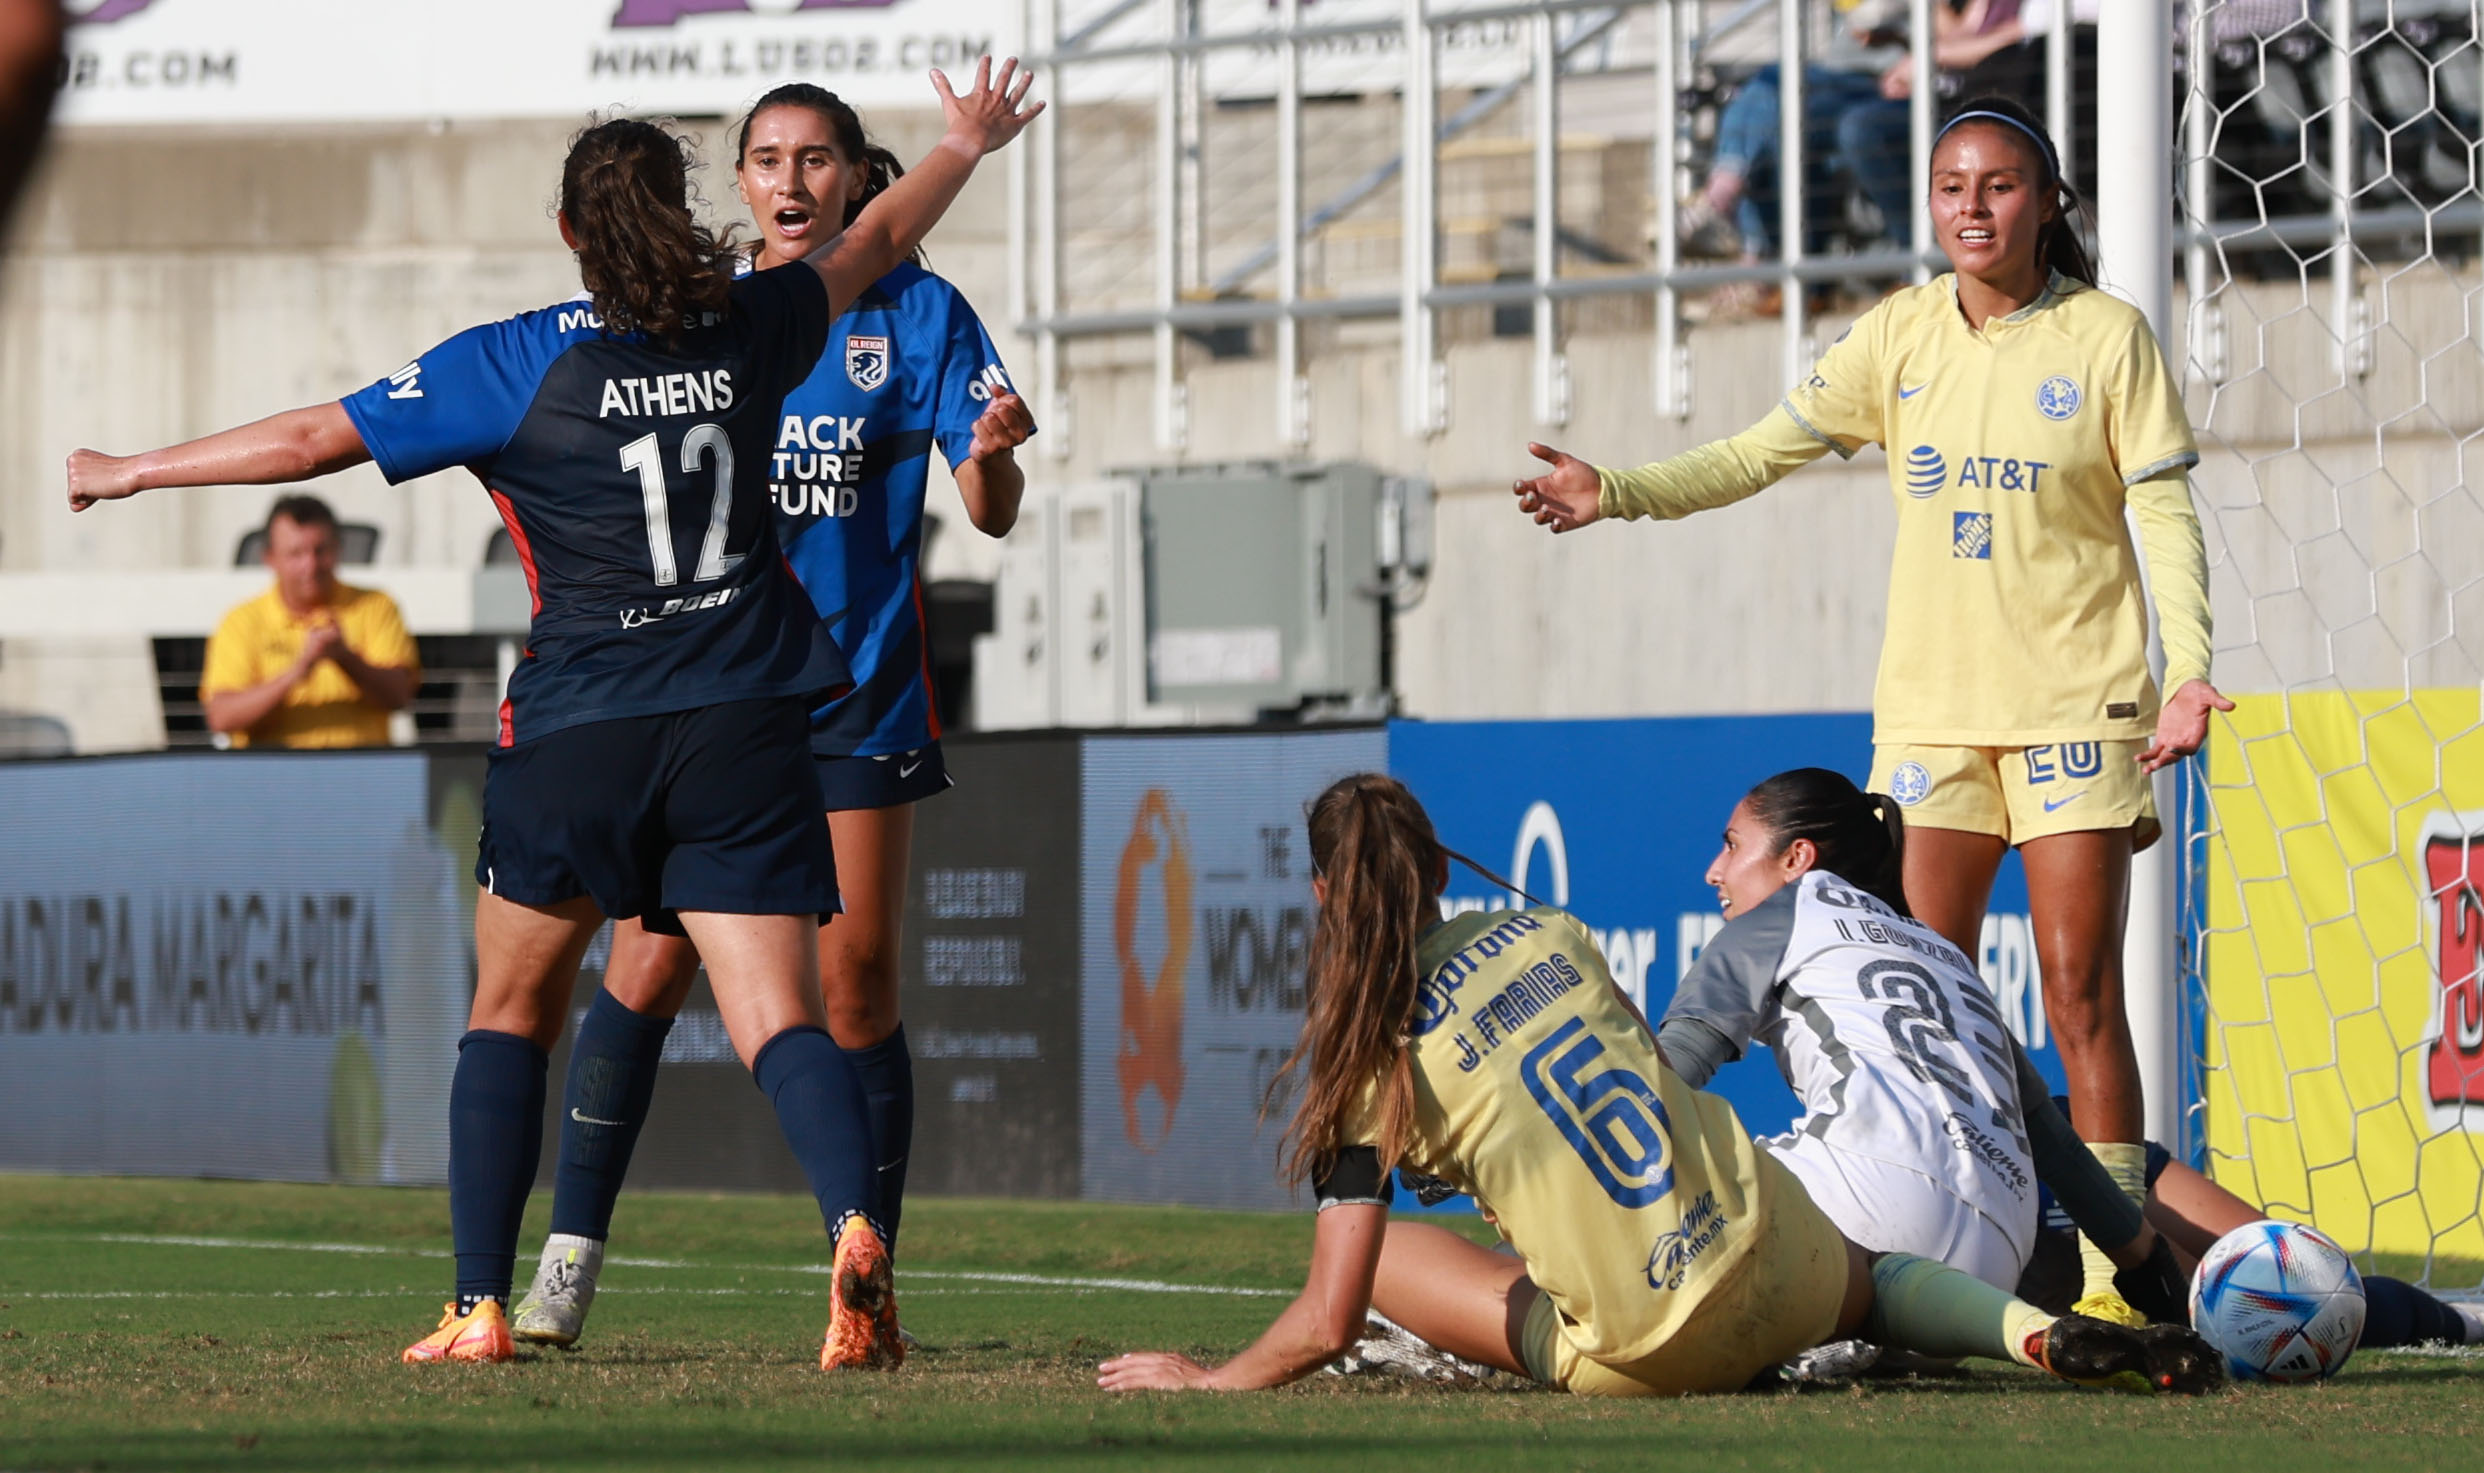 Soccer: The Women’s Cup-OL Reign at Club America